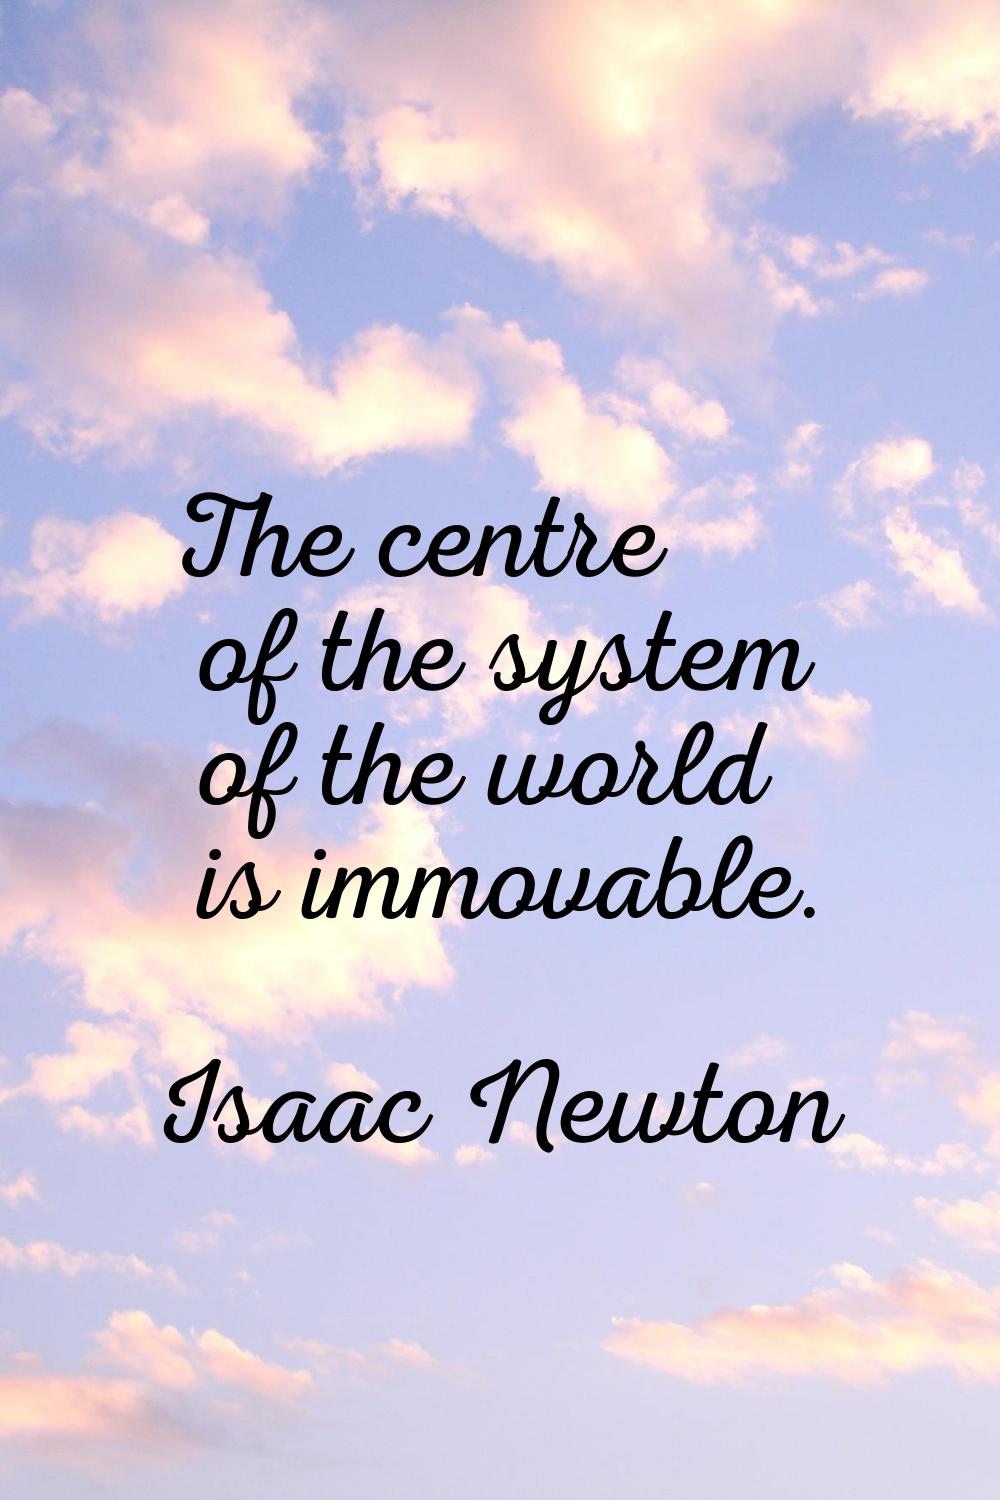 The centre of the system of the world is immovable.